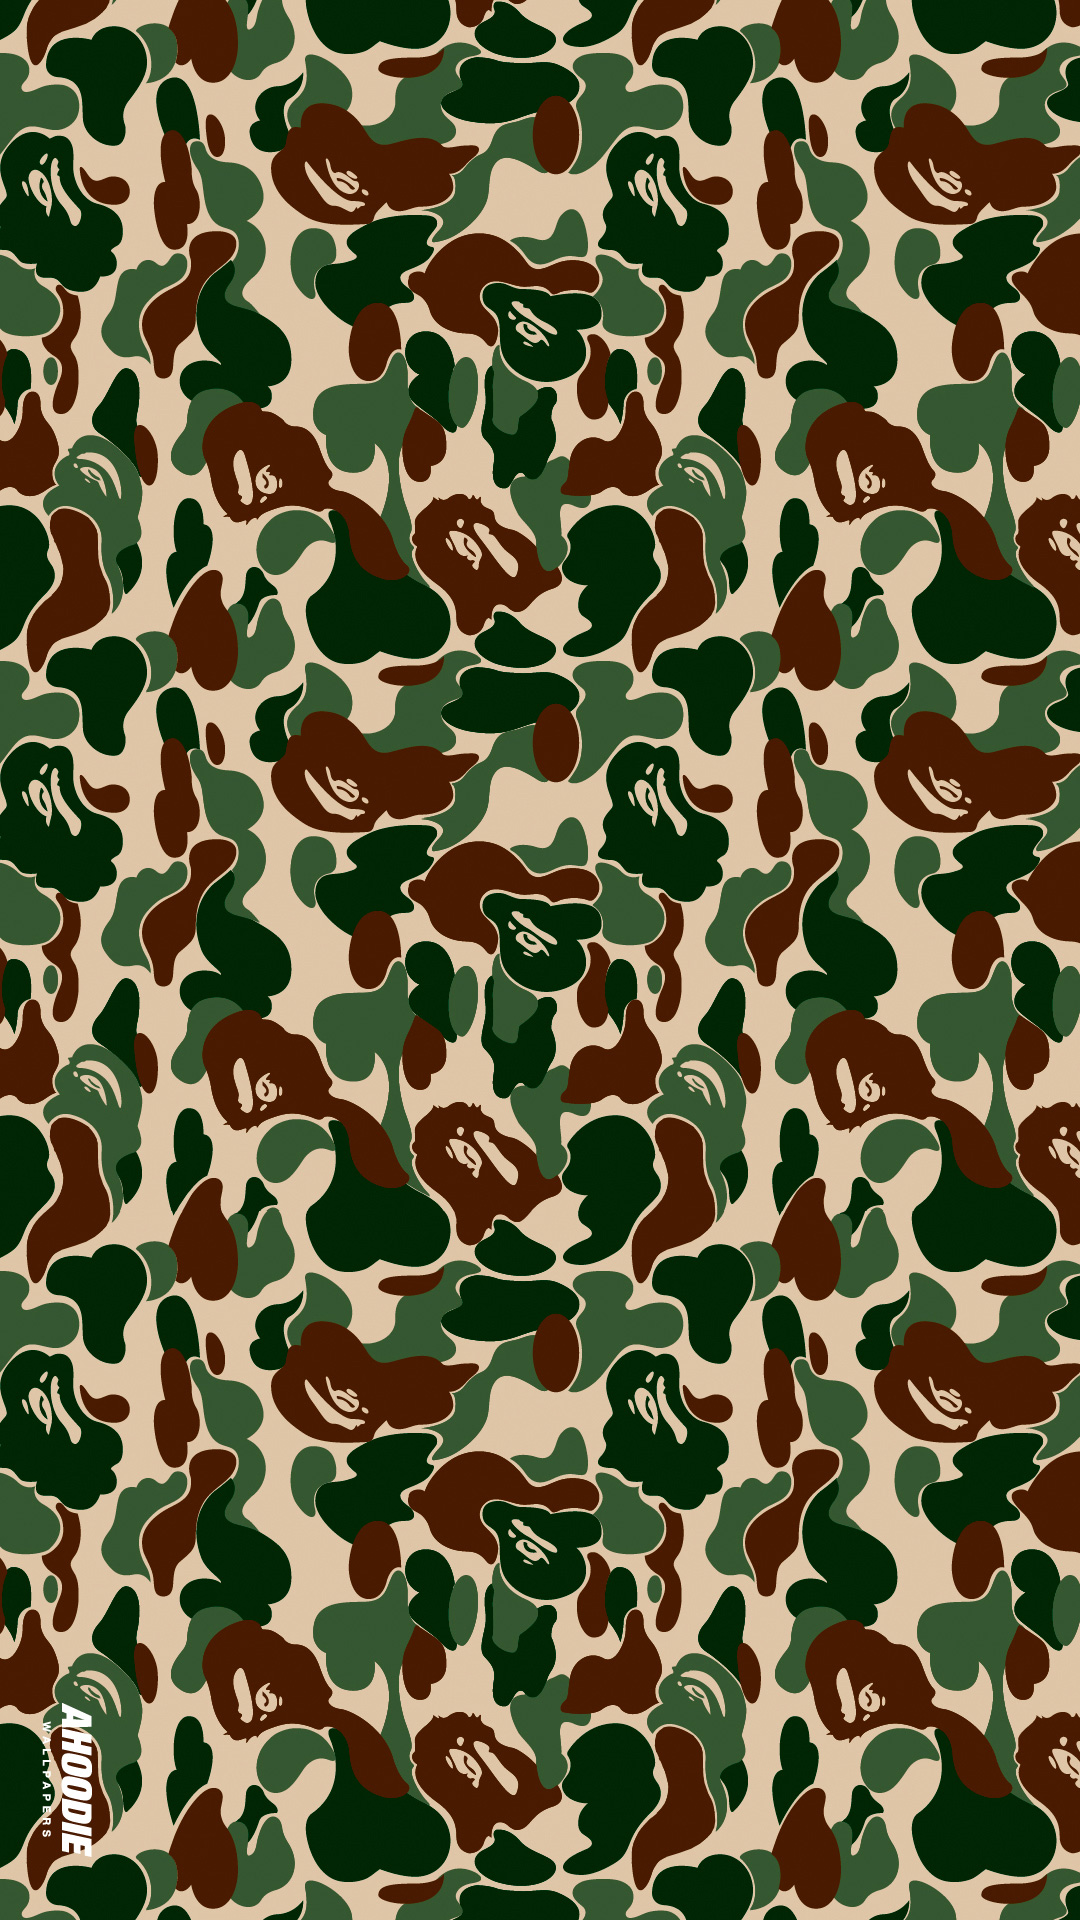 bape wallpaper,green,pattern,military camouflage,brown,camouflage